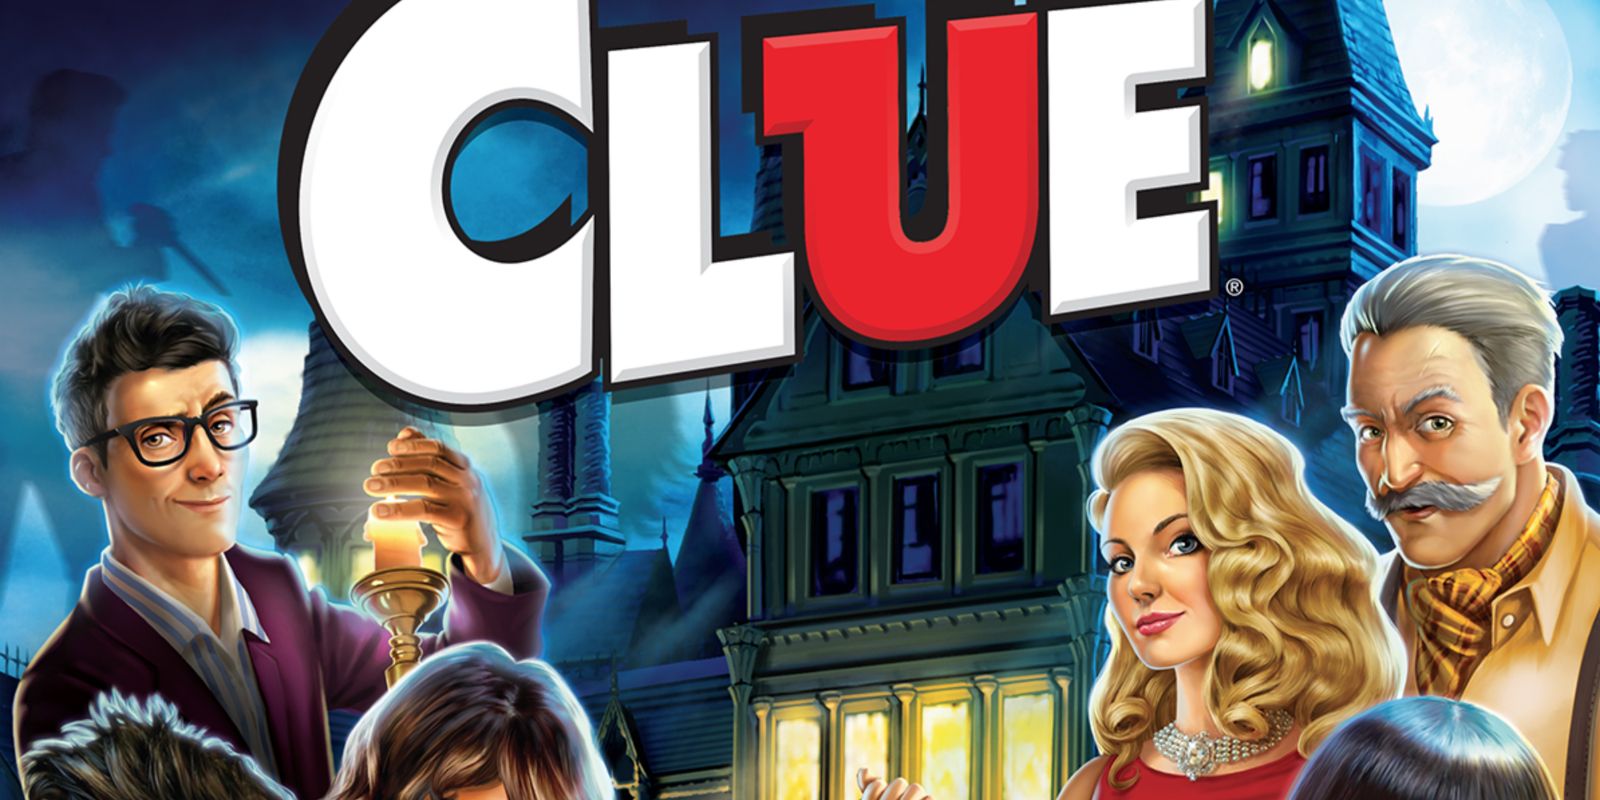 Clue board game movie reboot in the works